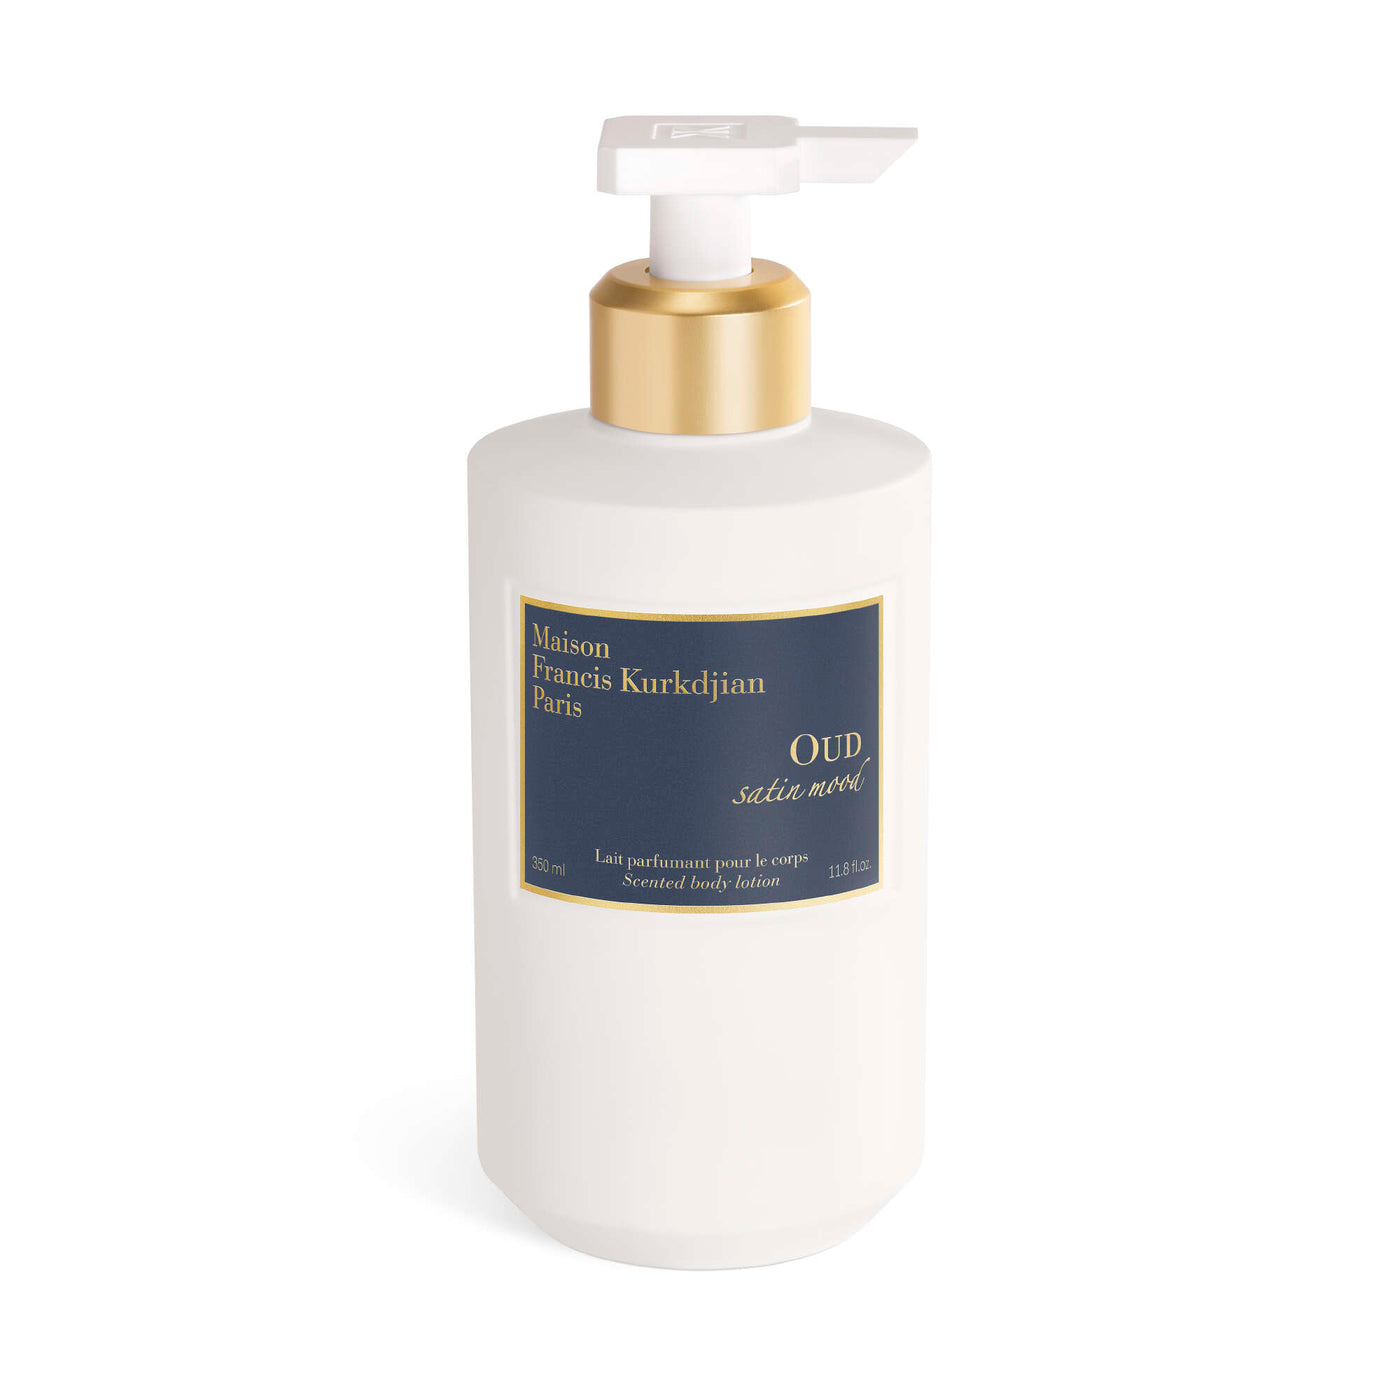 OUD satin mood - Scented Body Lotion